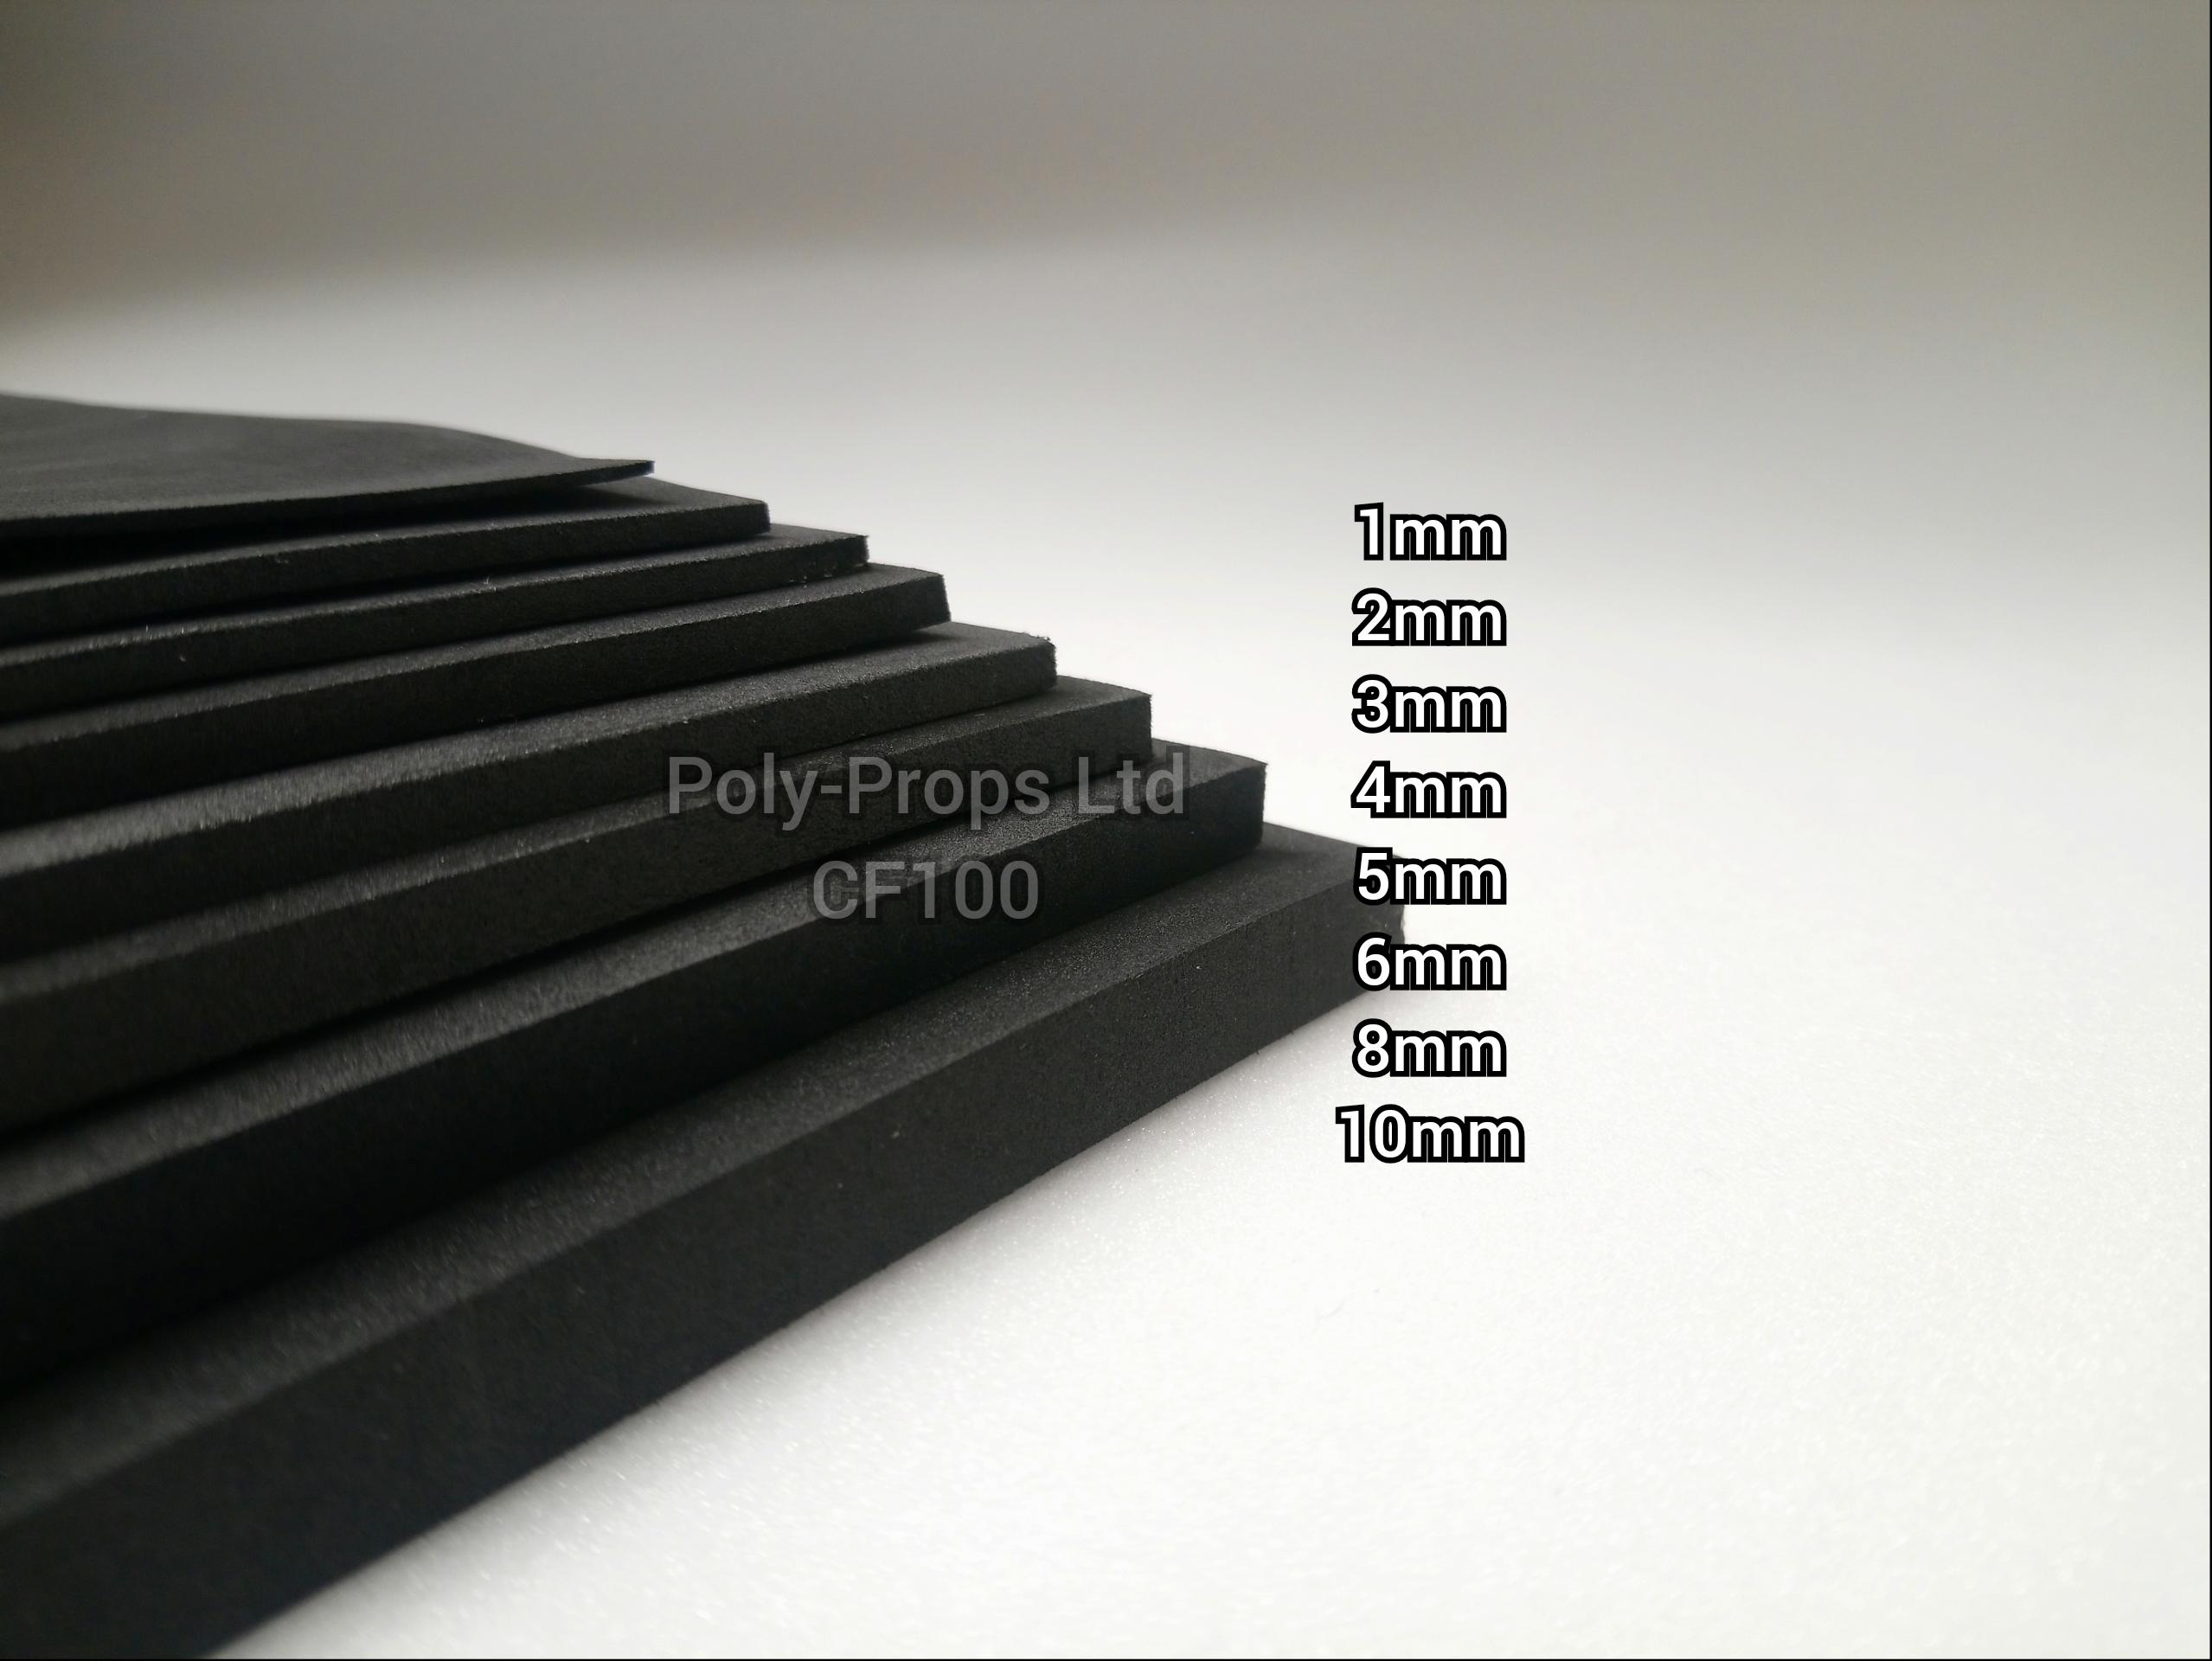 Wholesale Bulk 8mm craft foam Supplier At Low Prices 